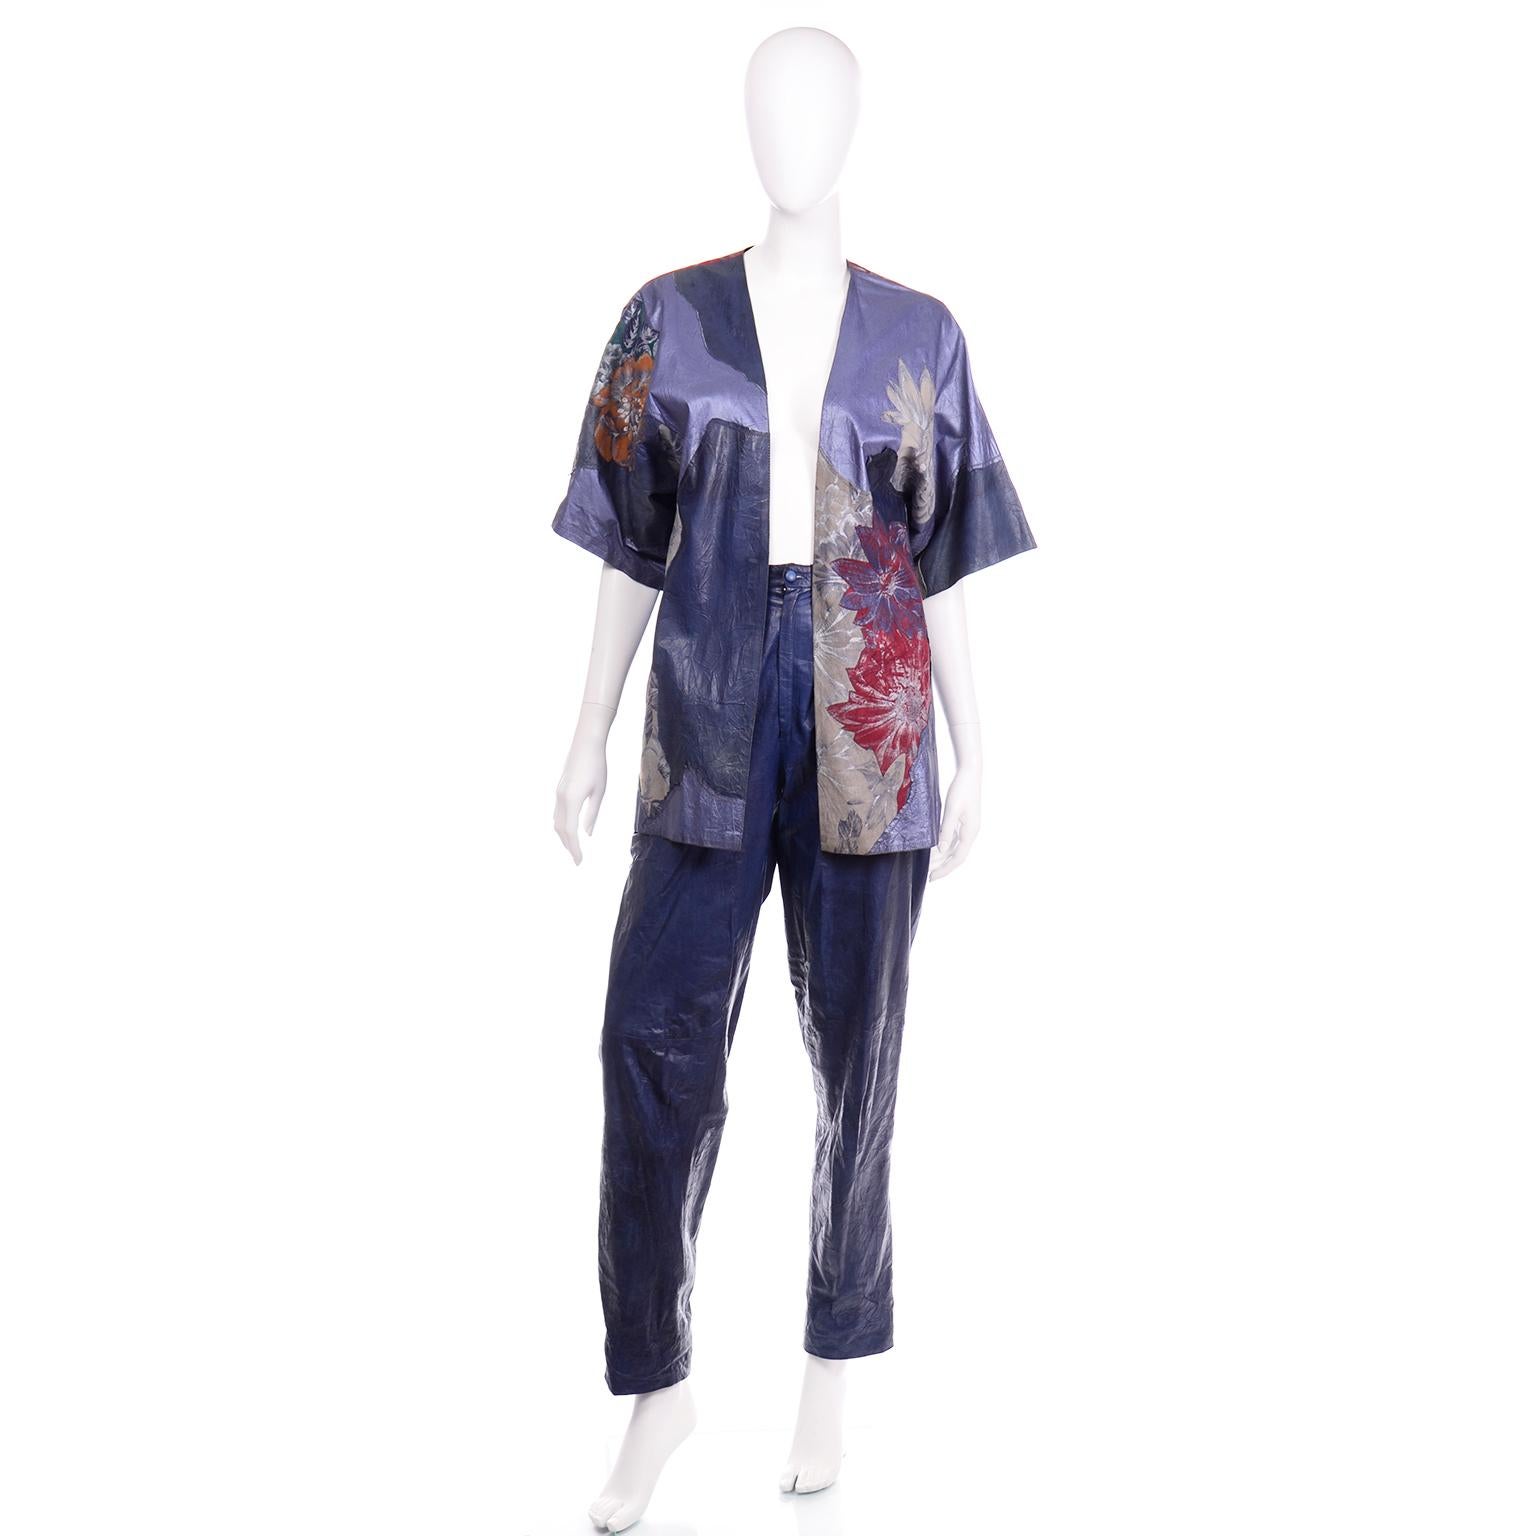 This Incredible blue patchwork style leather ensemble was designed by Roberto Cavalli in the late 1970's or early 1980's. This leather pant suit is made of an ultra soft, lightweight leather in a variety of shades of blue. There are also some